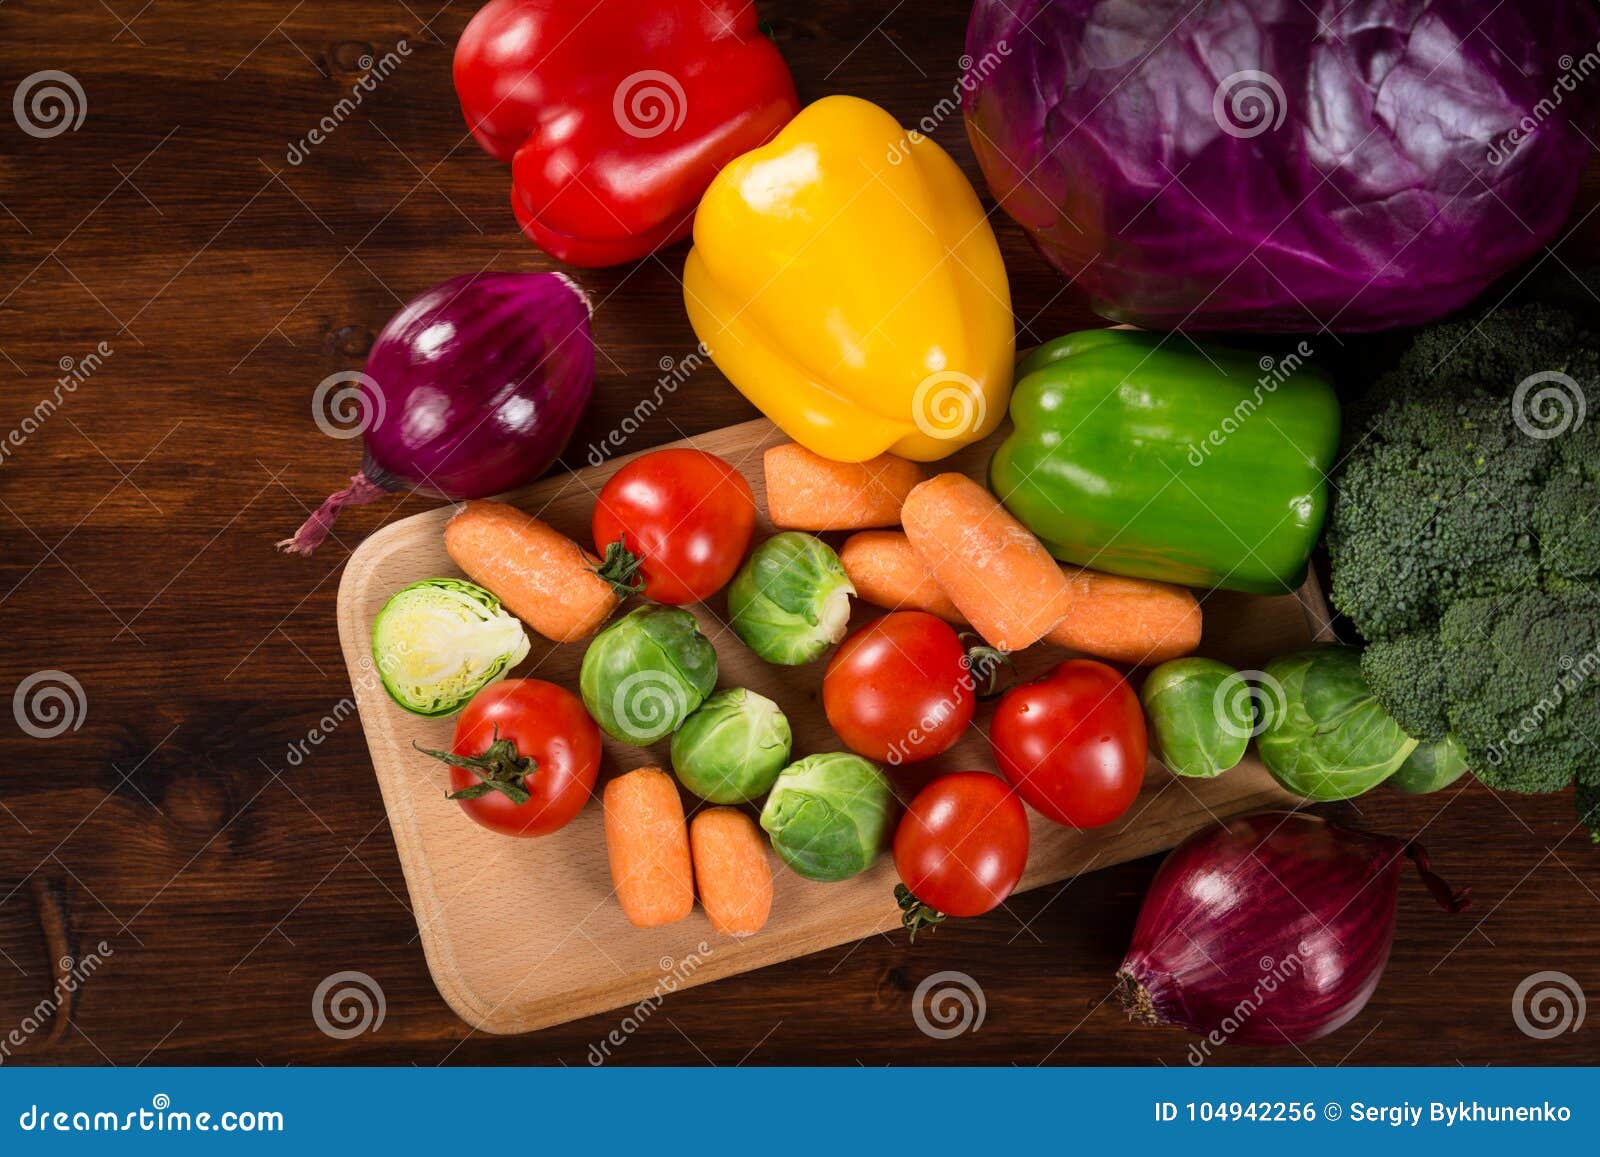 assortment of fresh vegetales on table with copyspace